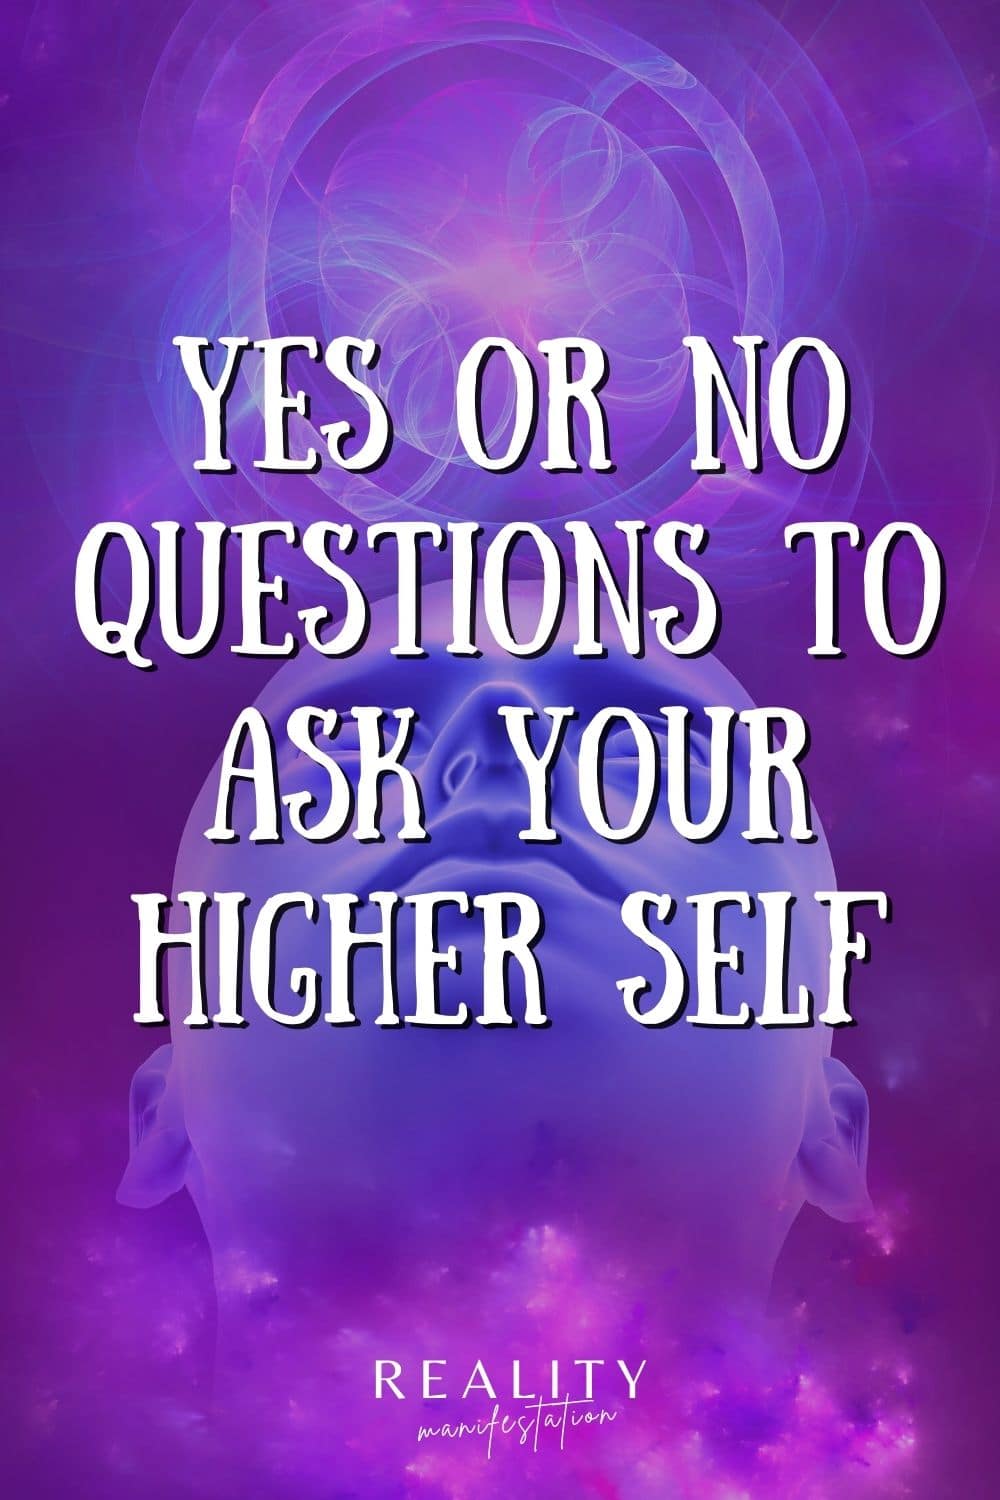  Purple background with swirling energy with a purple face facing up with text above it saying Yes No Questions To Ask Your Higher Self